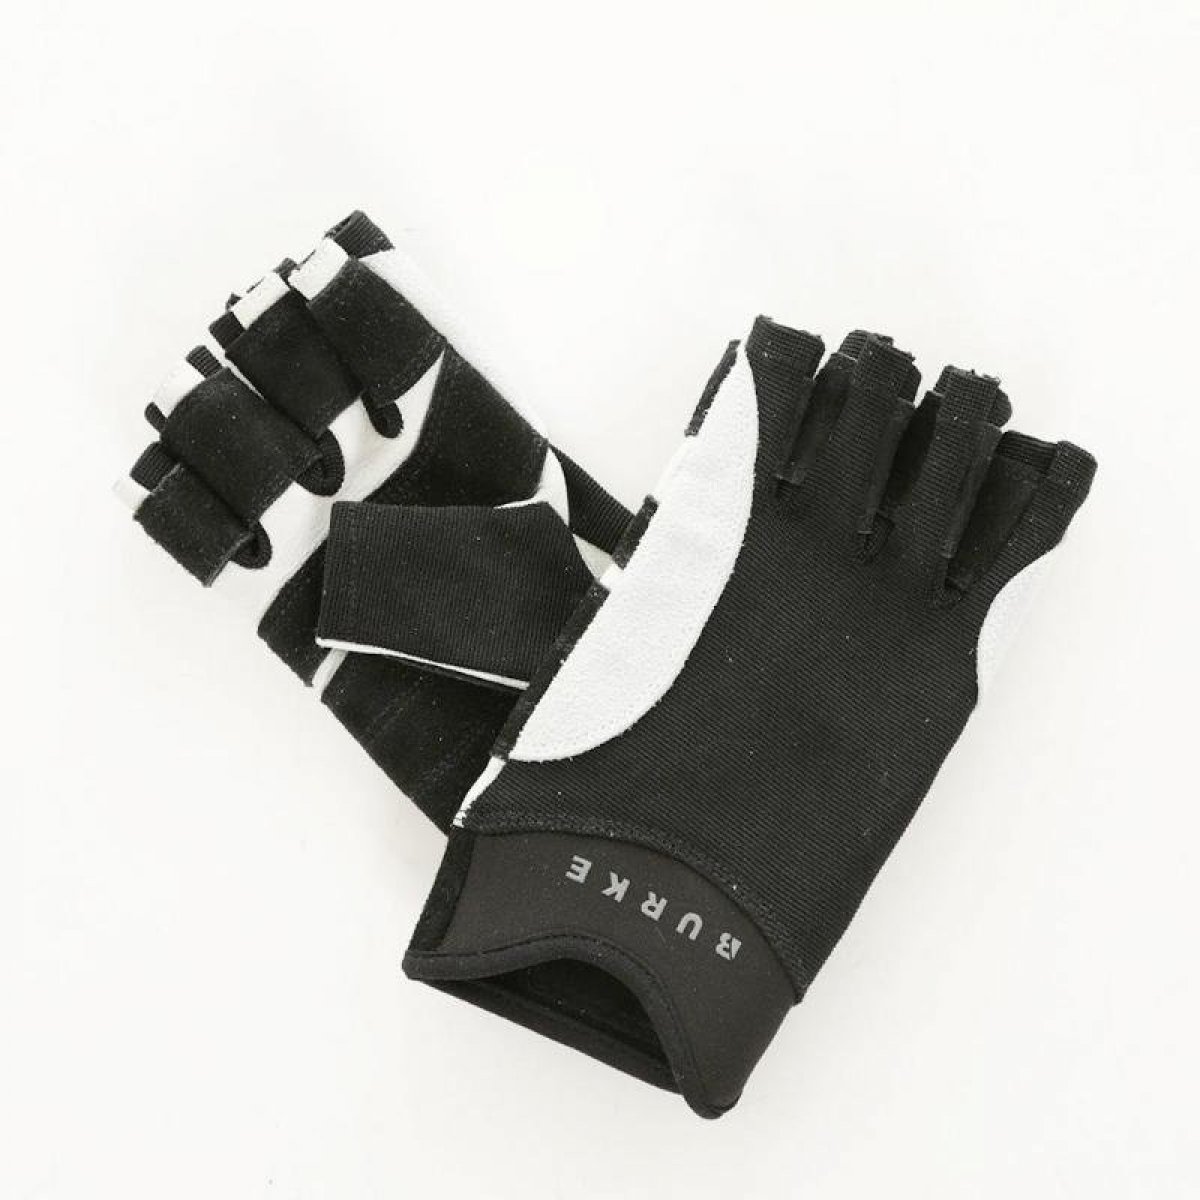 BURKE SAILING GLOVES - ASST SIZES - ONLY $ 25.00 A PAIR